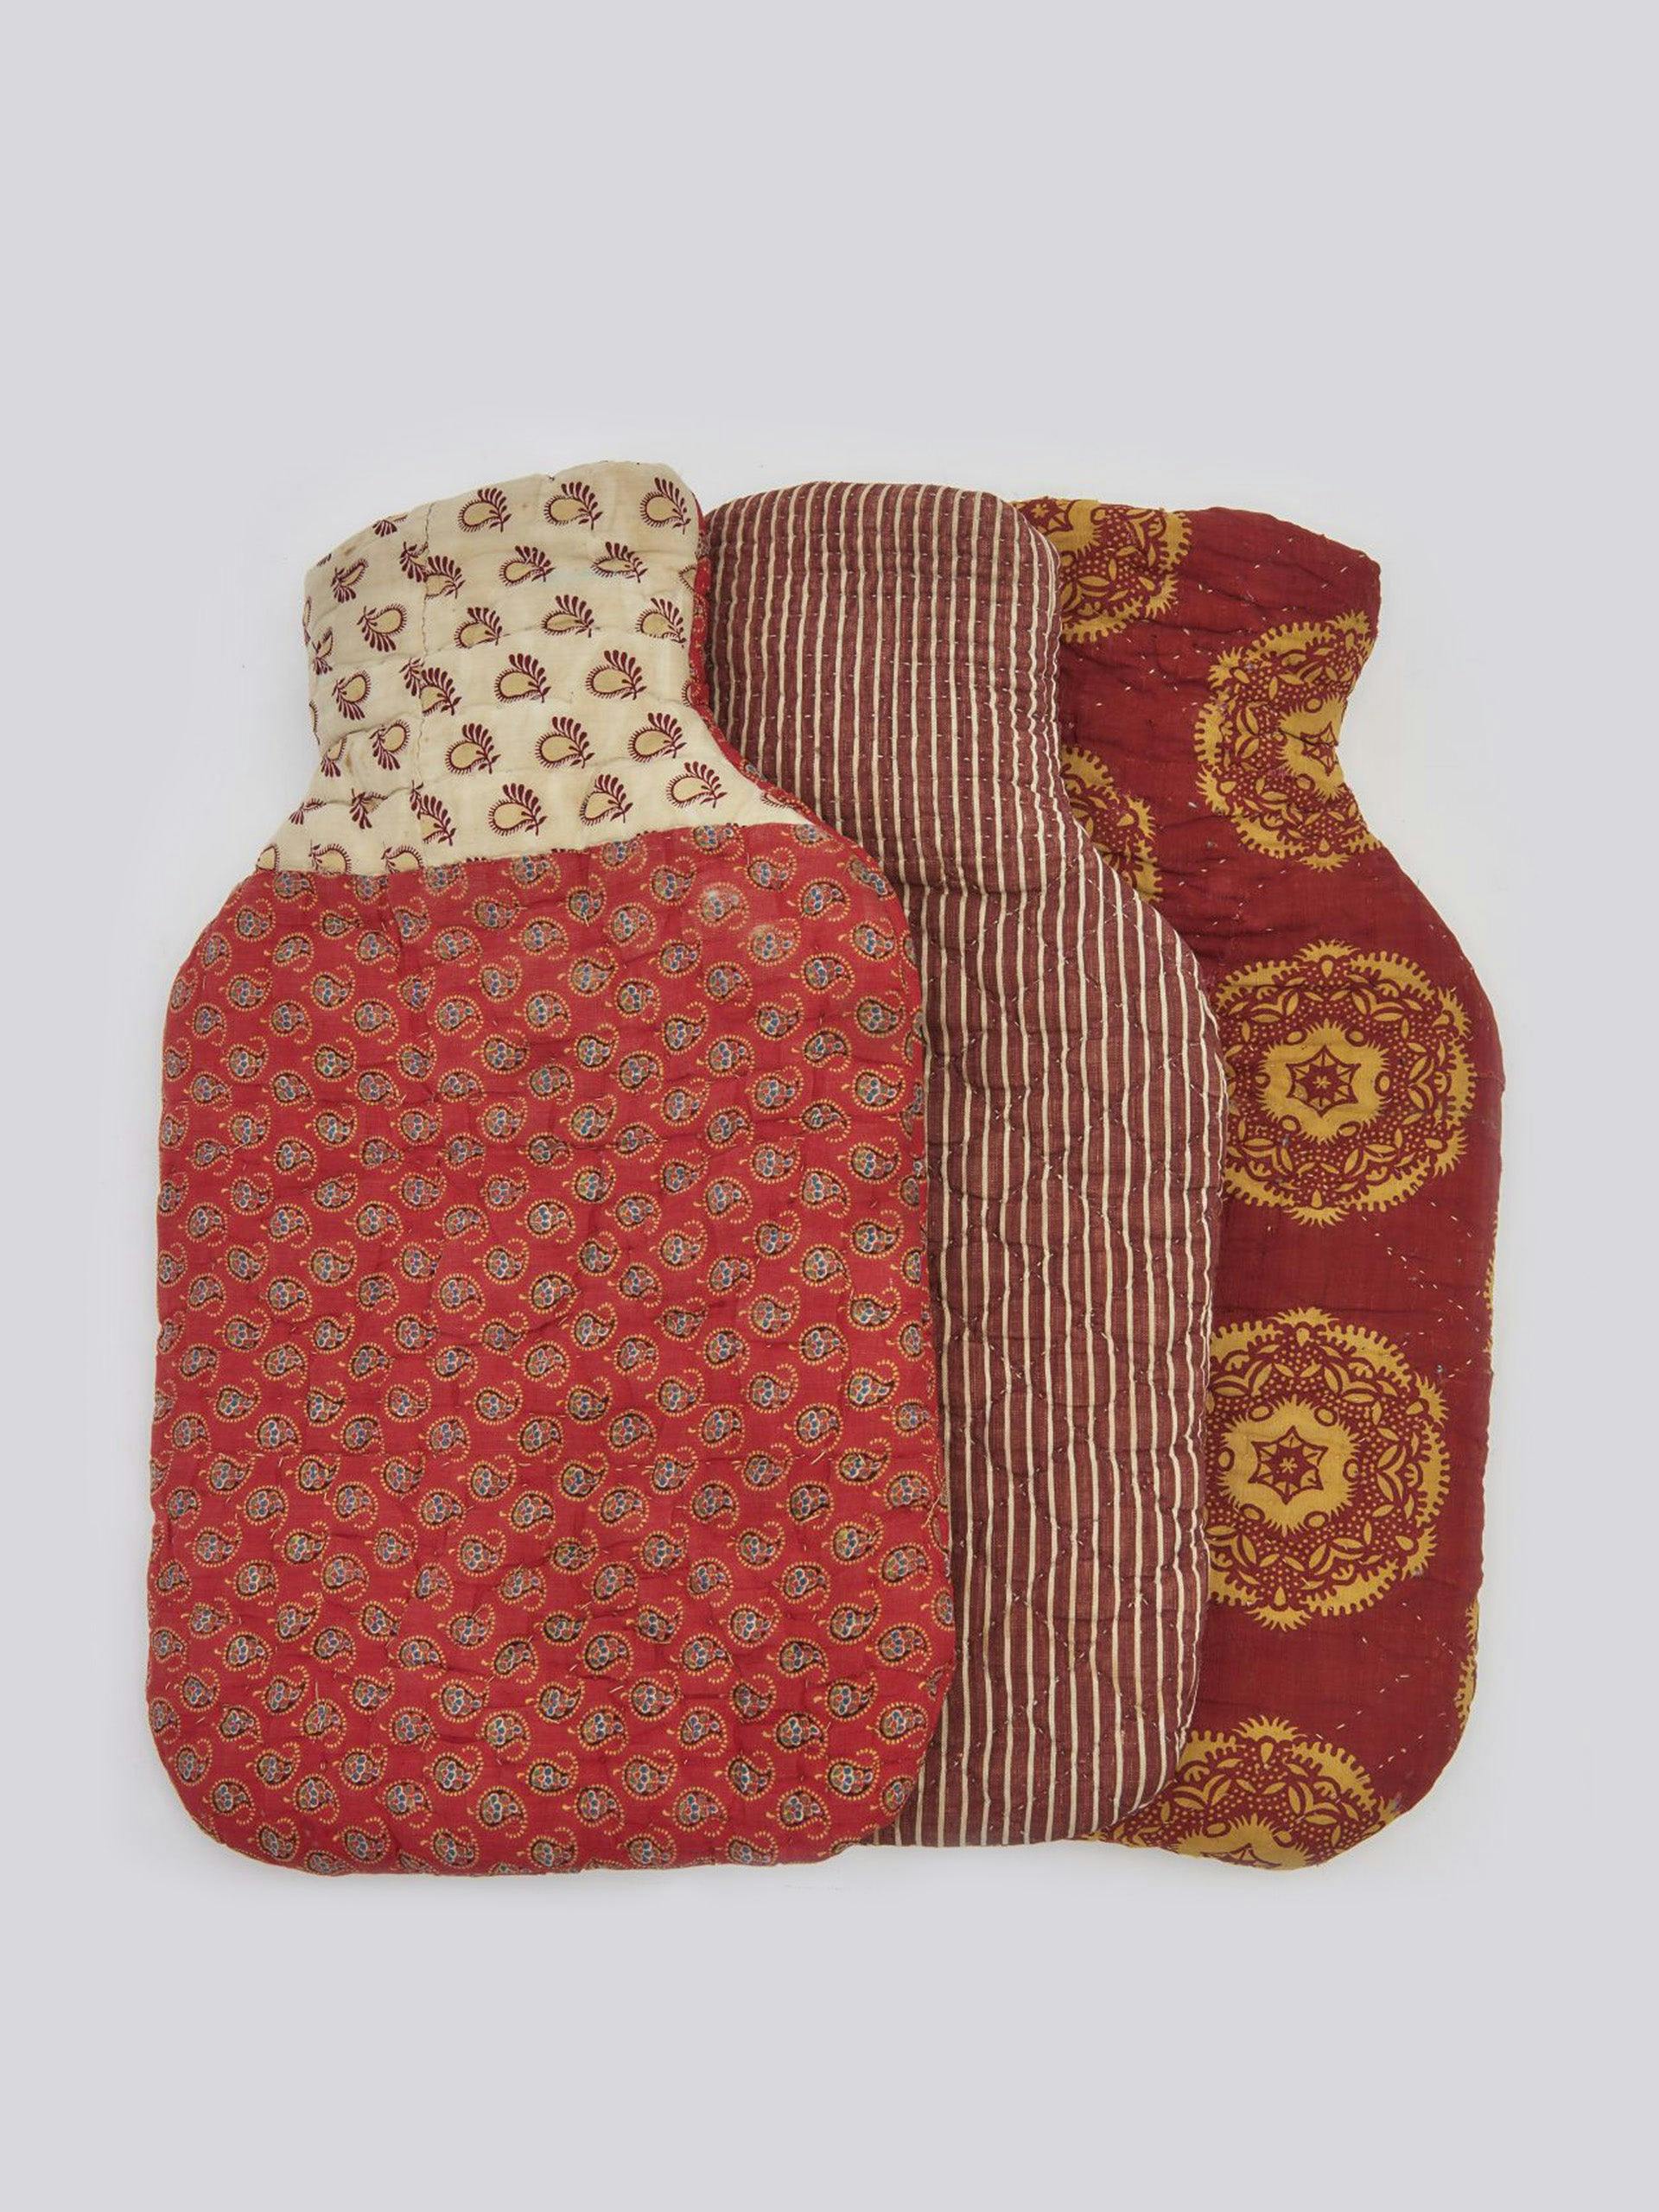 Hot water bottles with vintage fabric covers